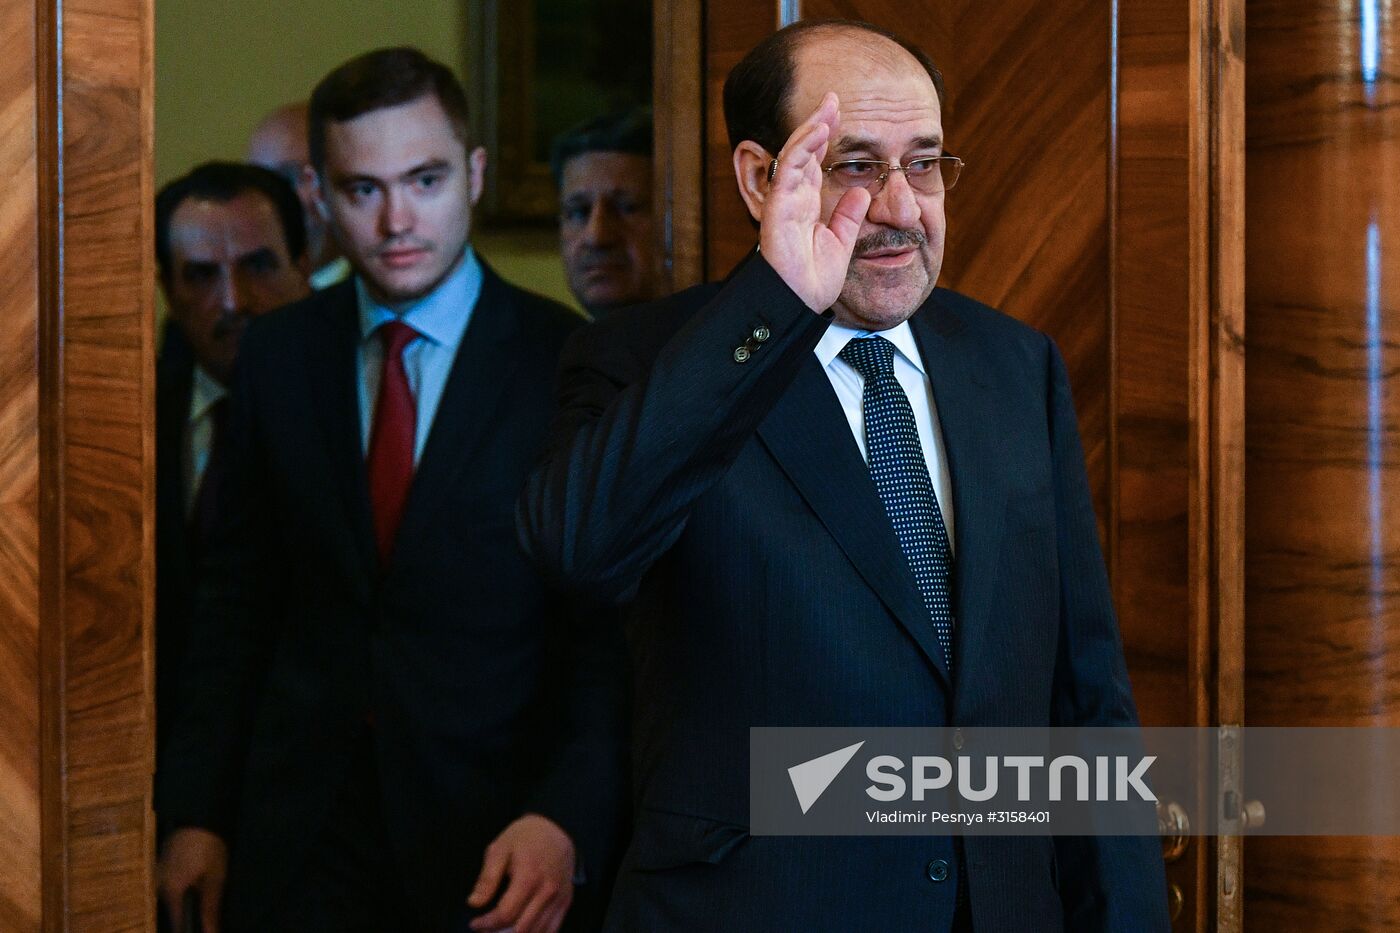 Russia's Foreign Minister Sergei Lavrov meets with Iraq's Vice President Nouri al-Maliki